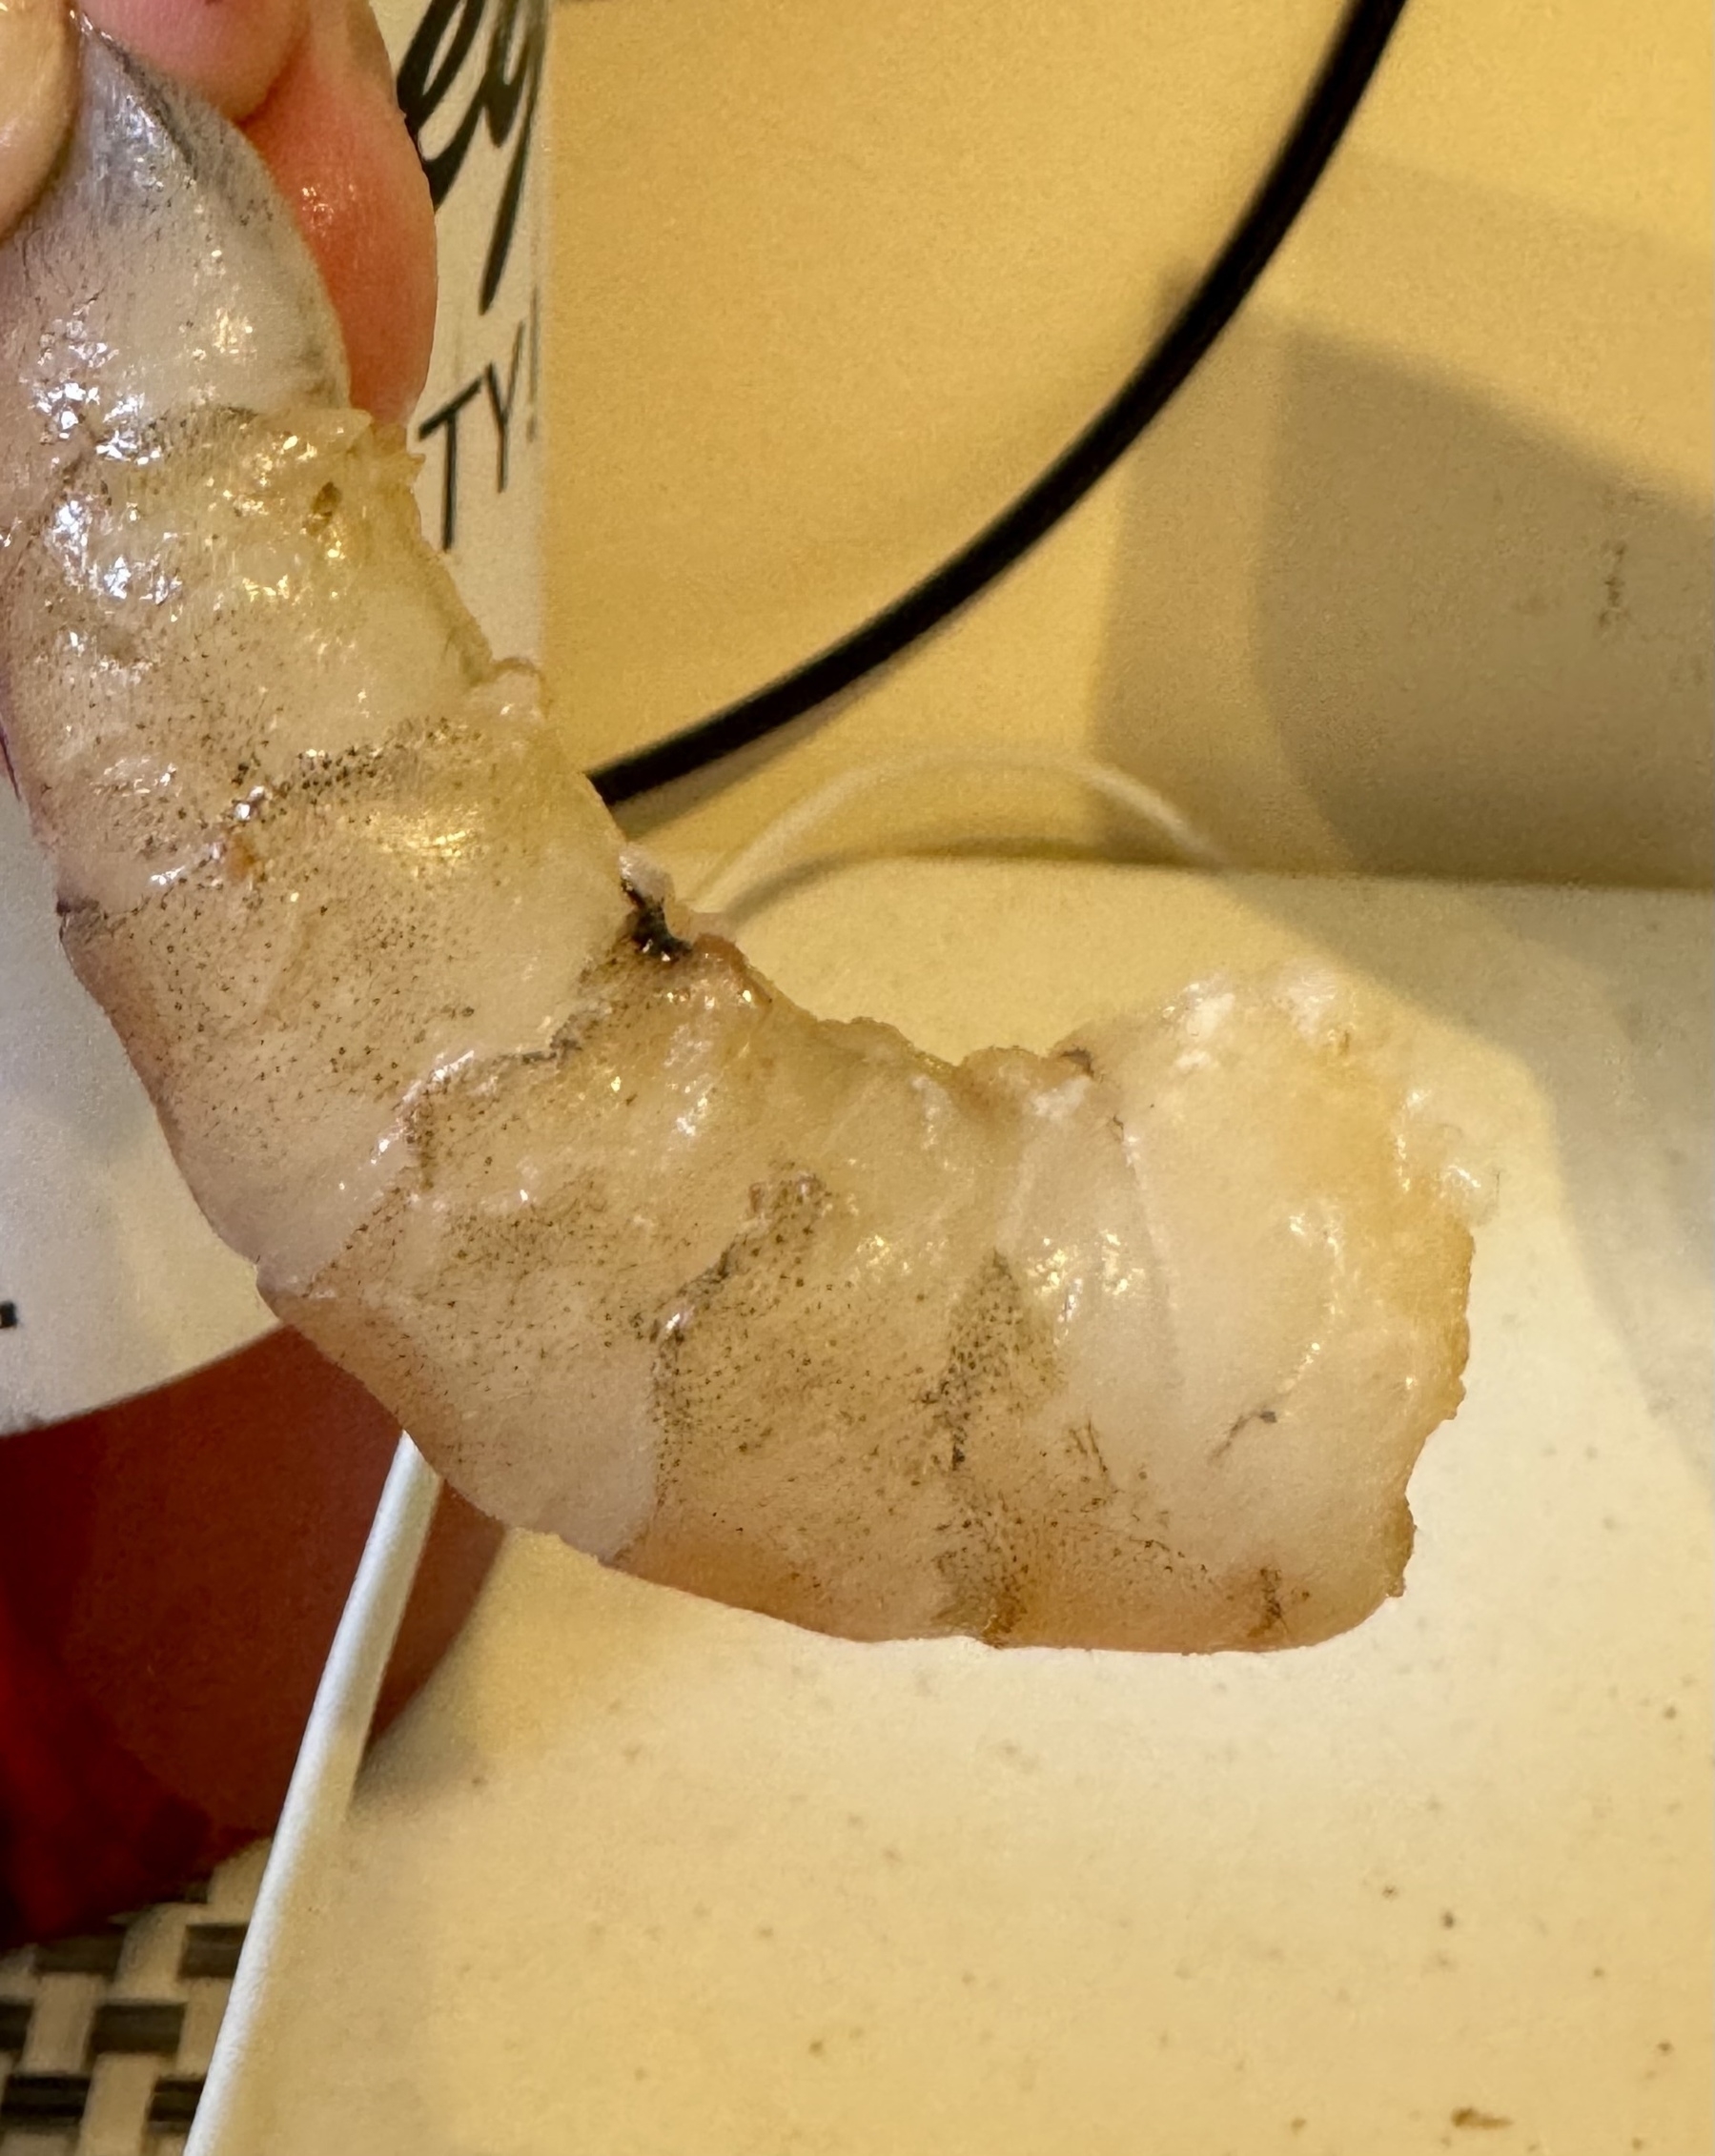 Close up of a sous vide cooked shrimp. It is almost translucent.